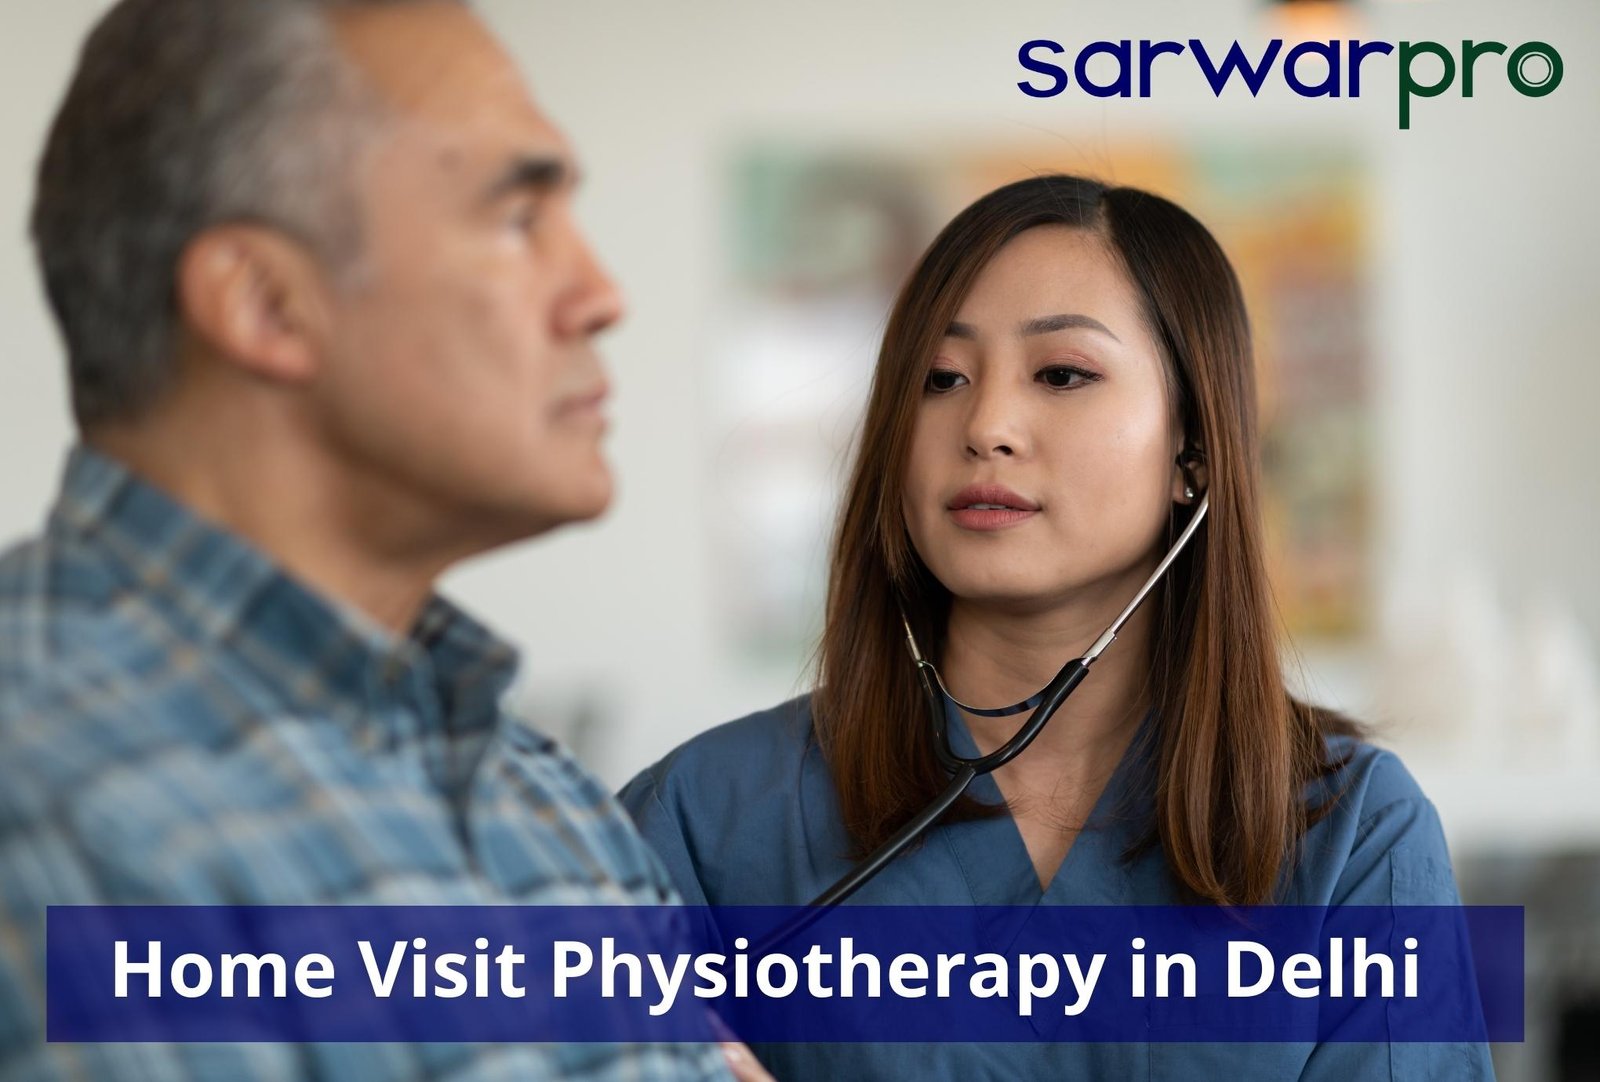 60377home-visit-physiotherapy-in-delhi.jpg